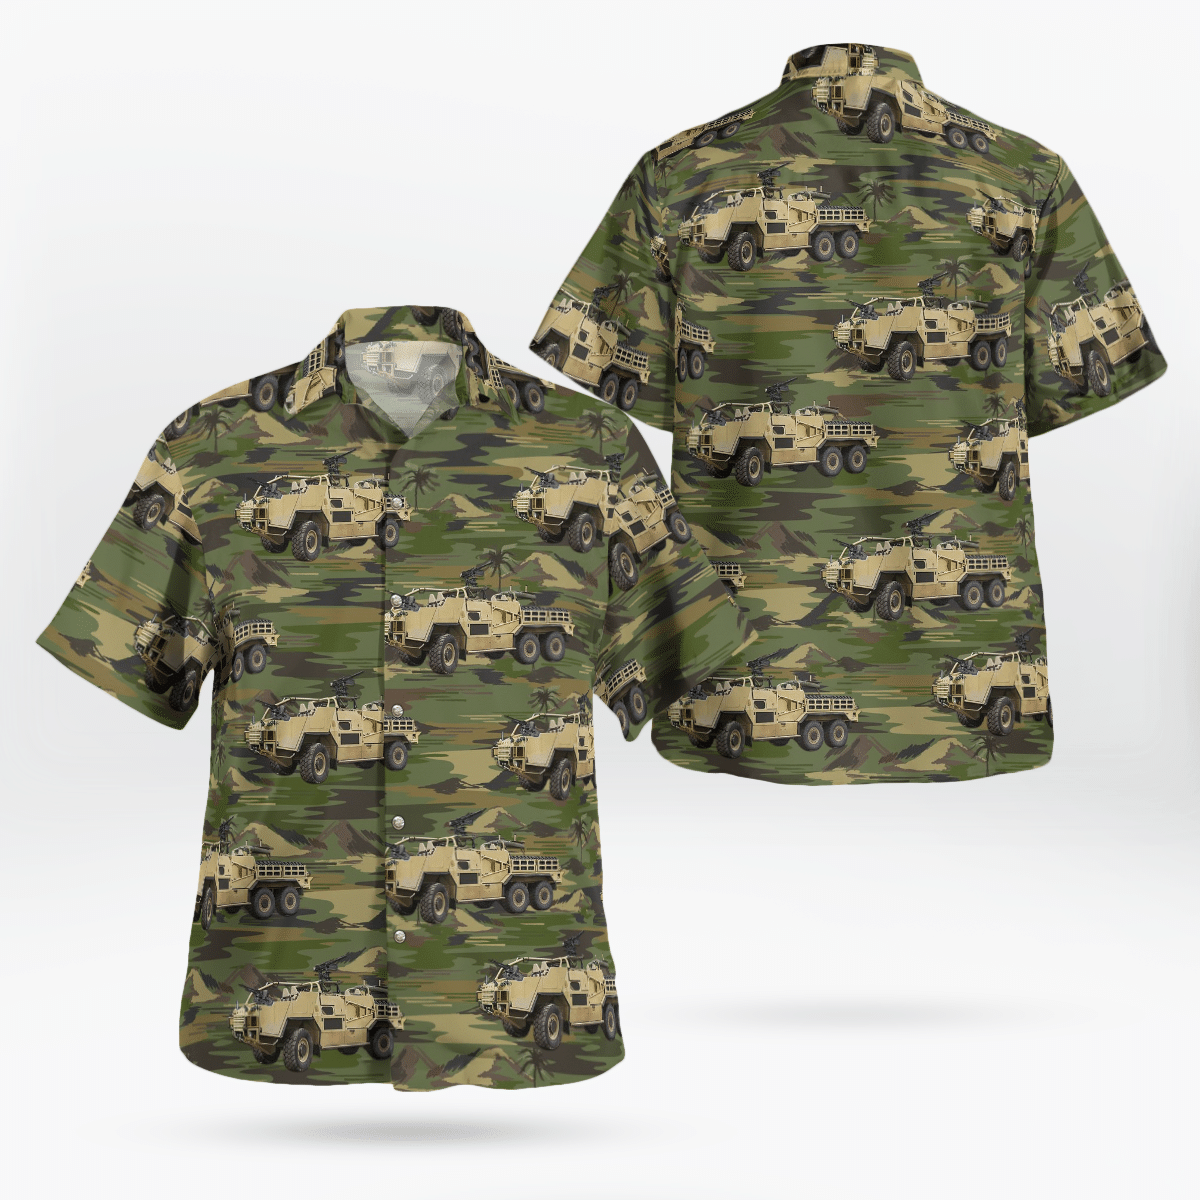 Shop now to find the perfect Hawaii Shirt for your hobby 6